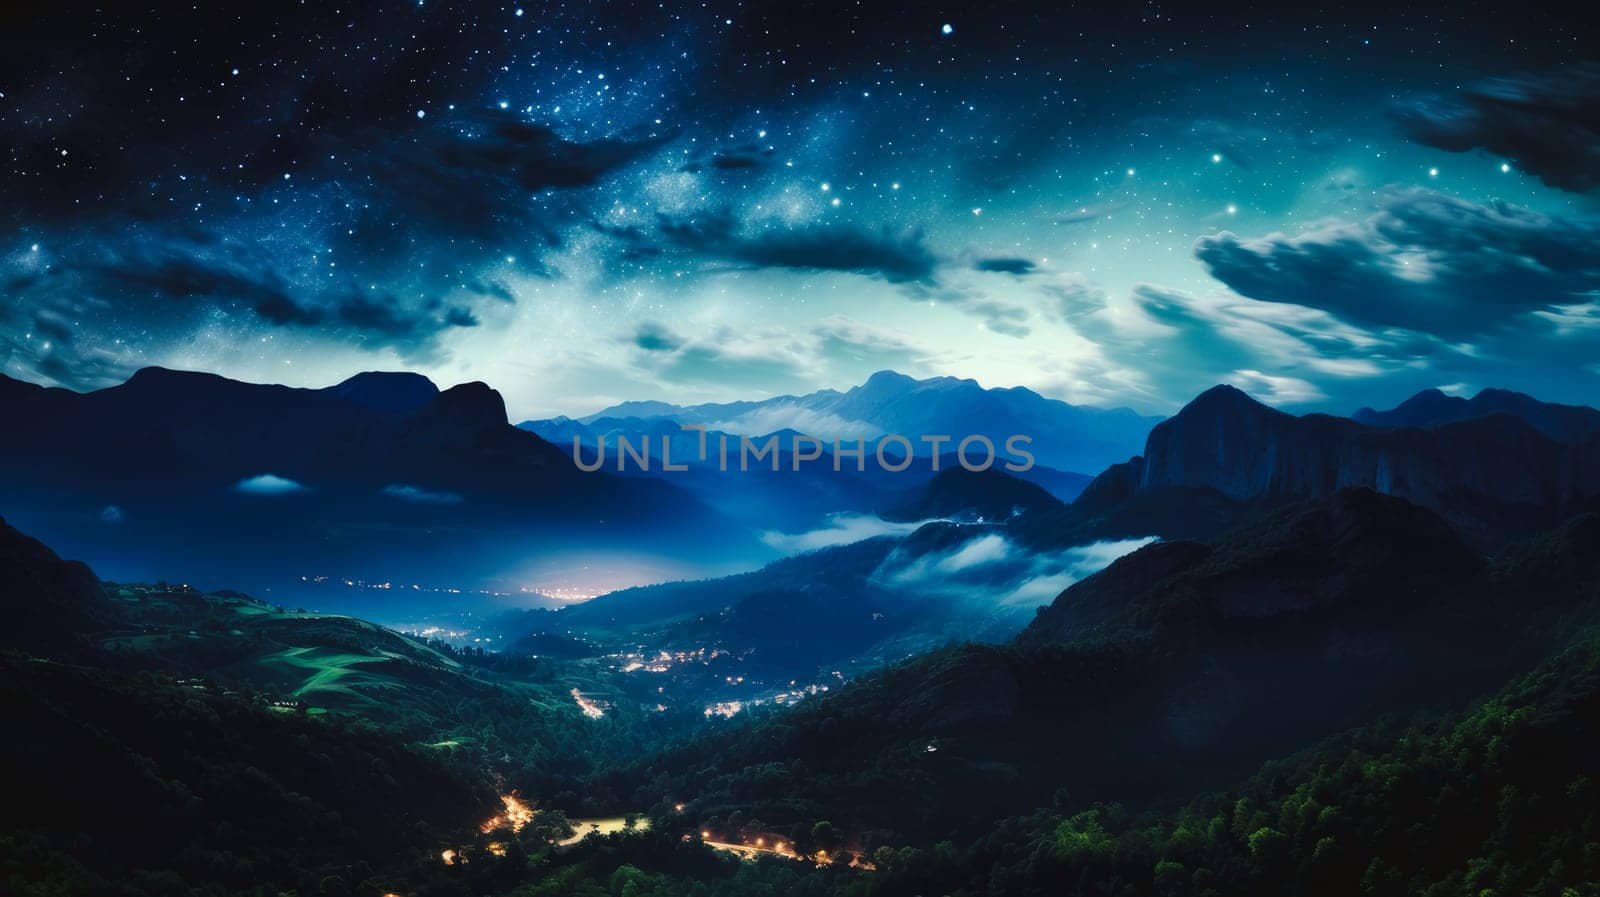 Beautiful night landscape with stars over the water. Beautiful Milky Way in the sky on a summer day. Beautiful landscape, picture, phone screensaver, copy space, advertising, travel agency, tourism, solitude with nature, without people